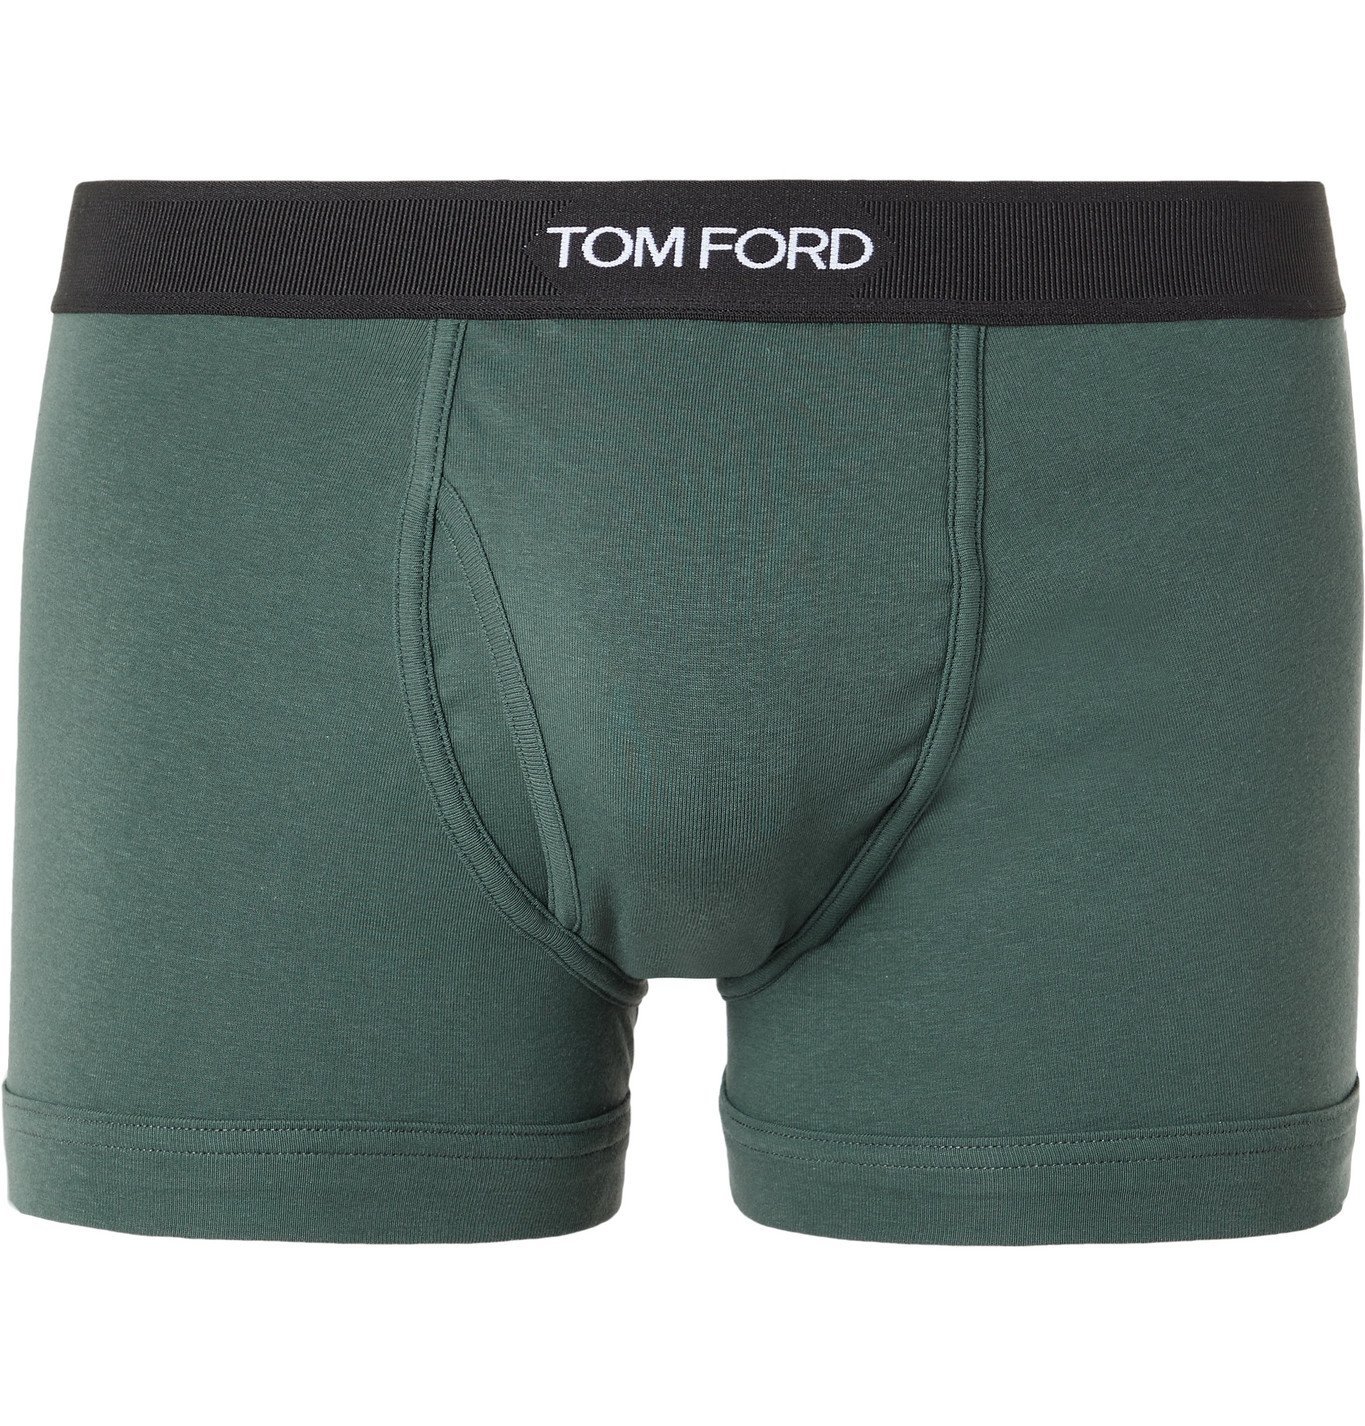 TOM FORD - Stretch-Cotton Jersey Boxer Briefs - Green TOM FORD